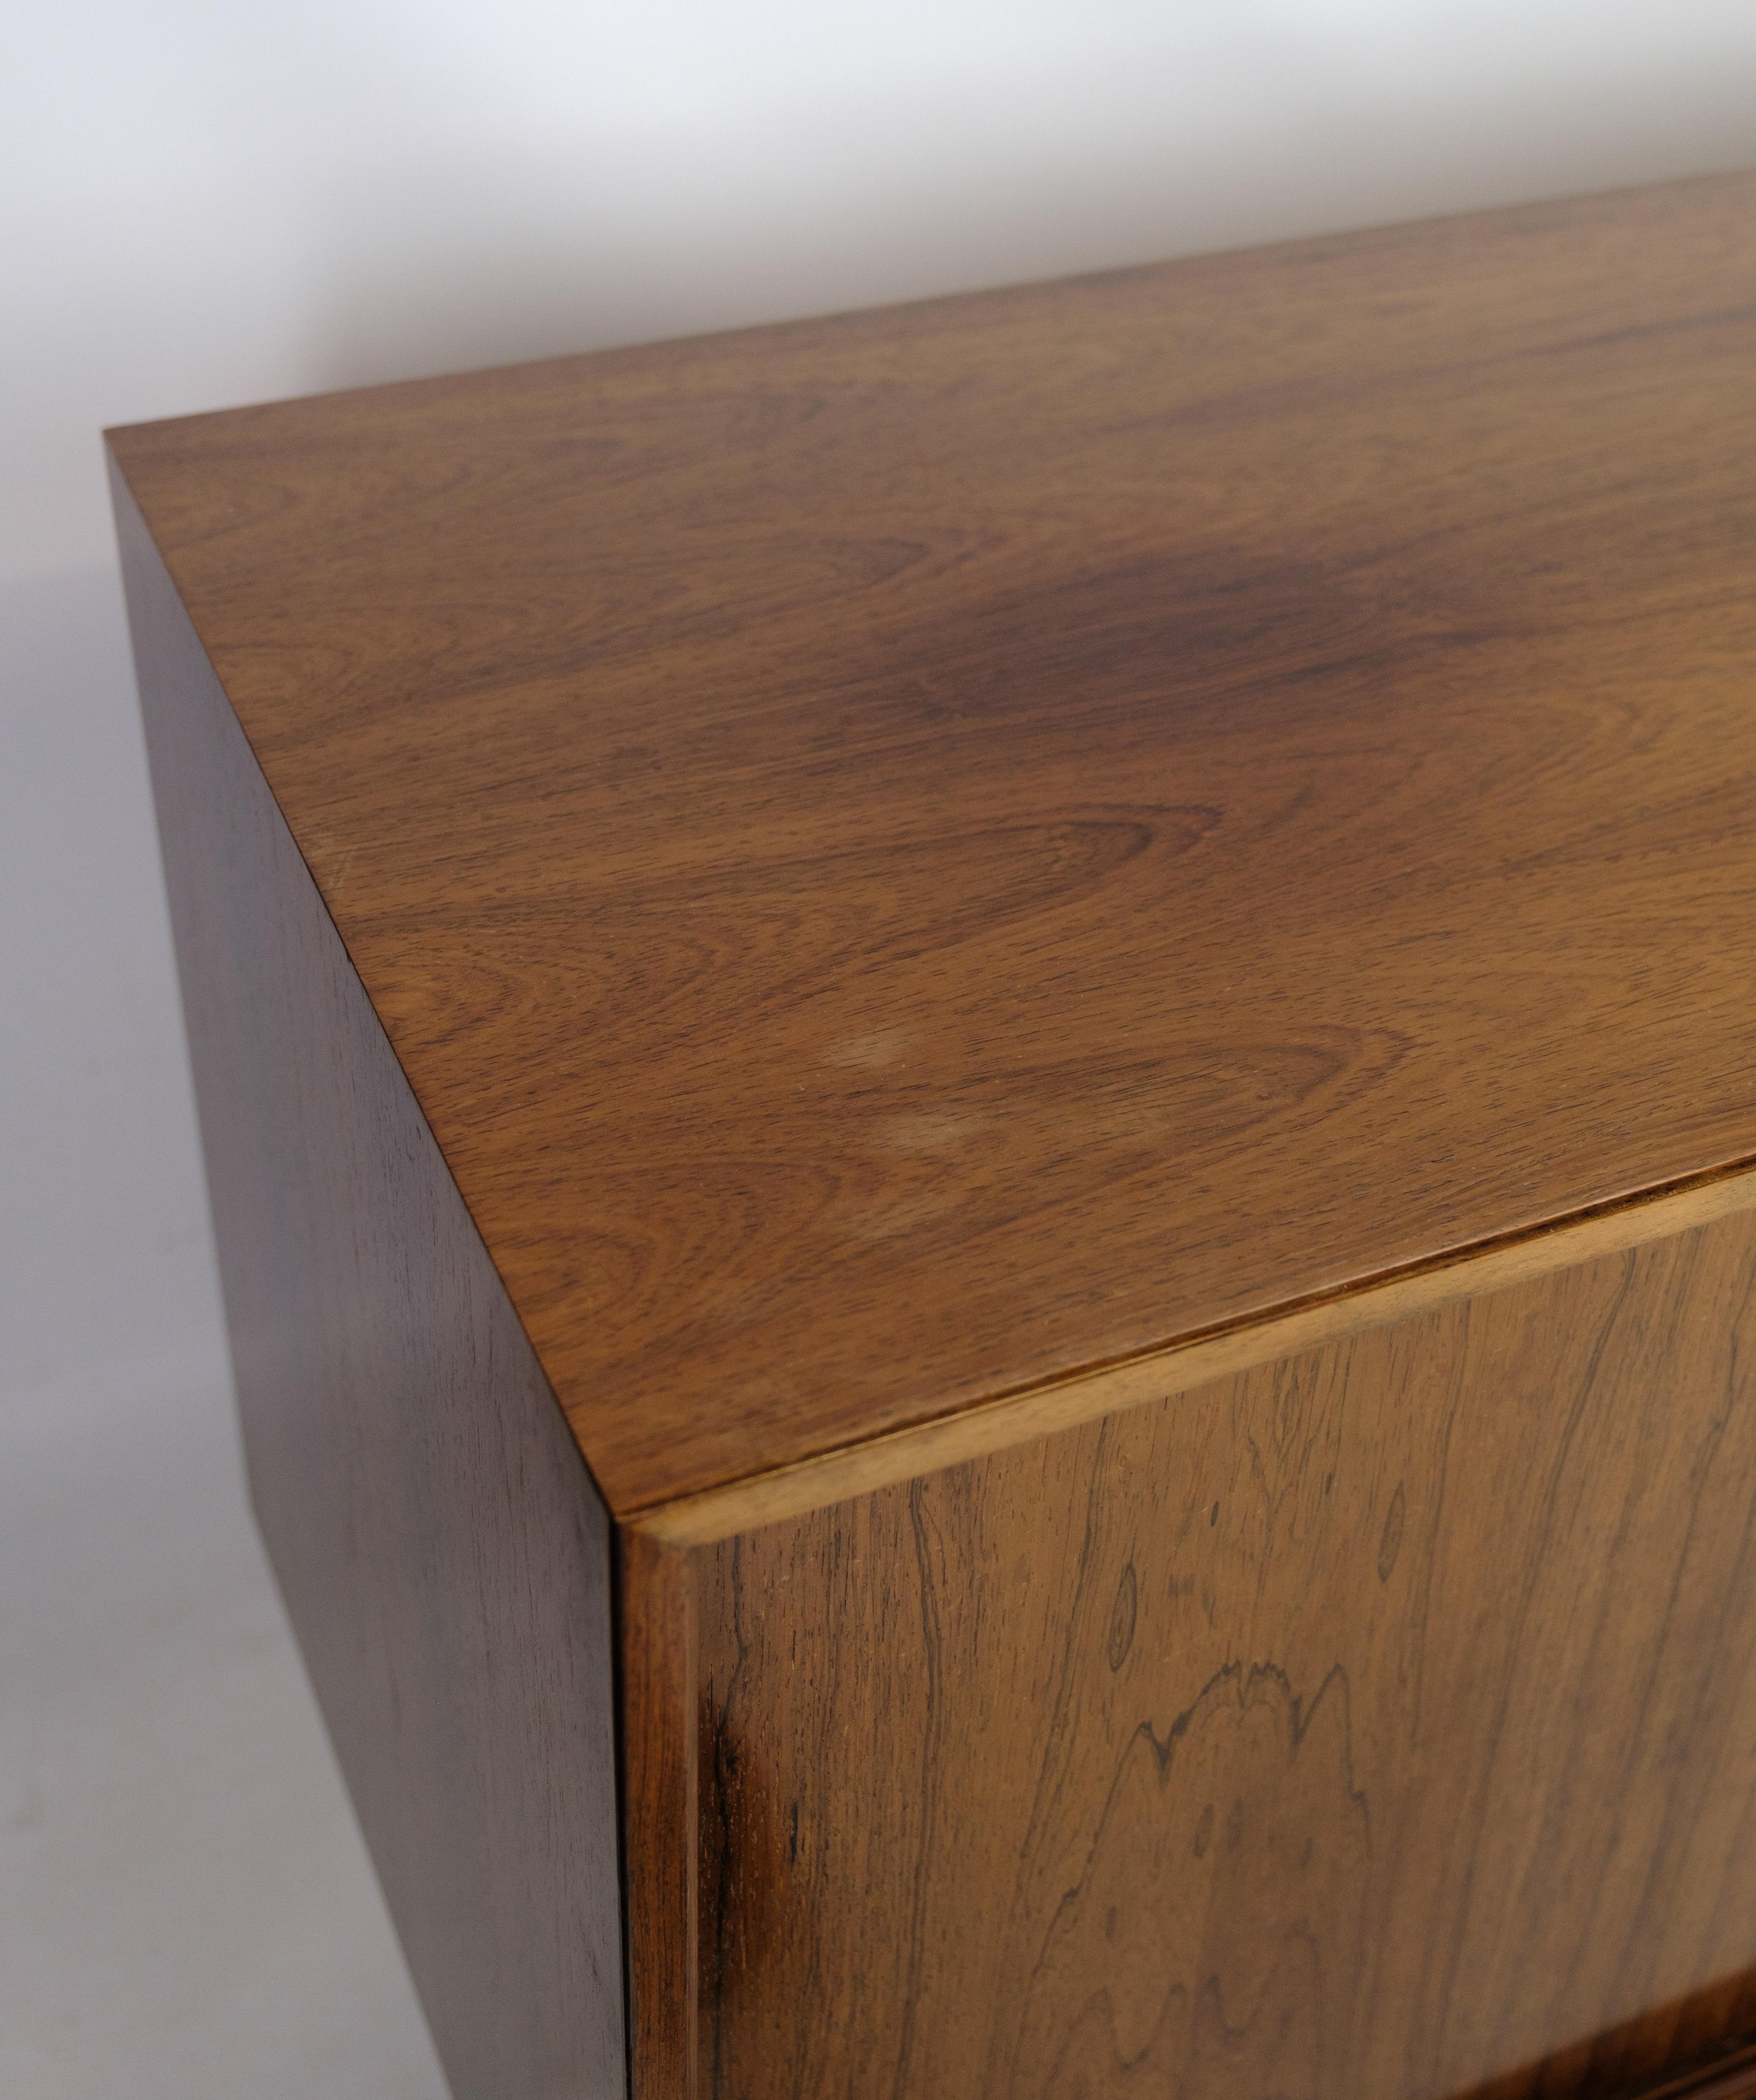 Mid-20th Century Low Sideboard By Omann Junior Made In Rosewood, Danish Design From 1960s For Sale